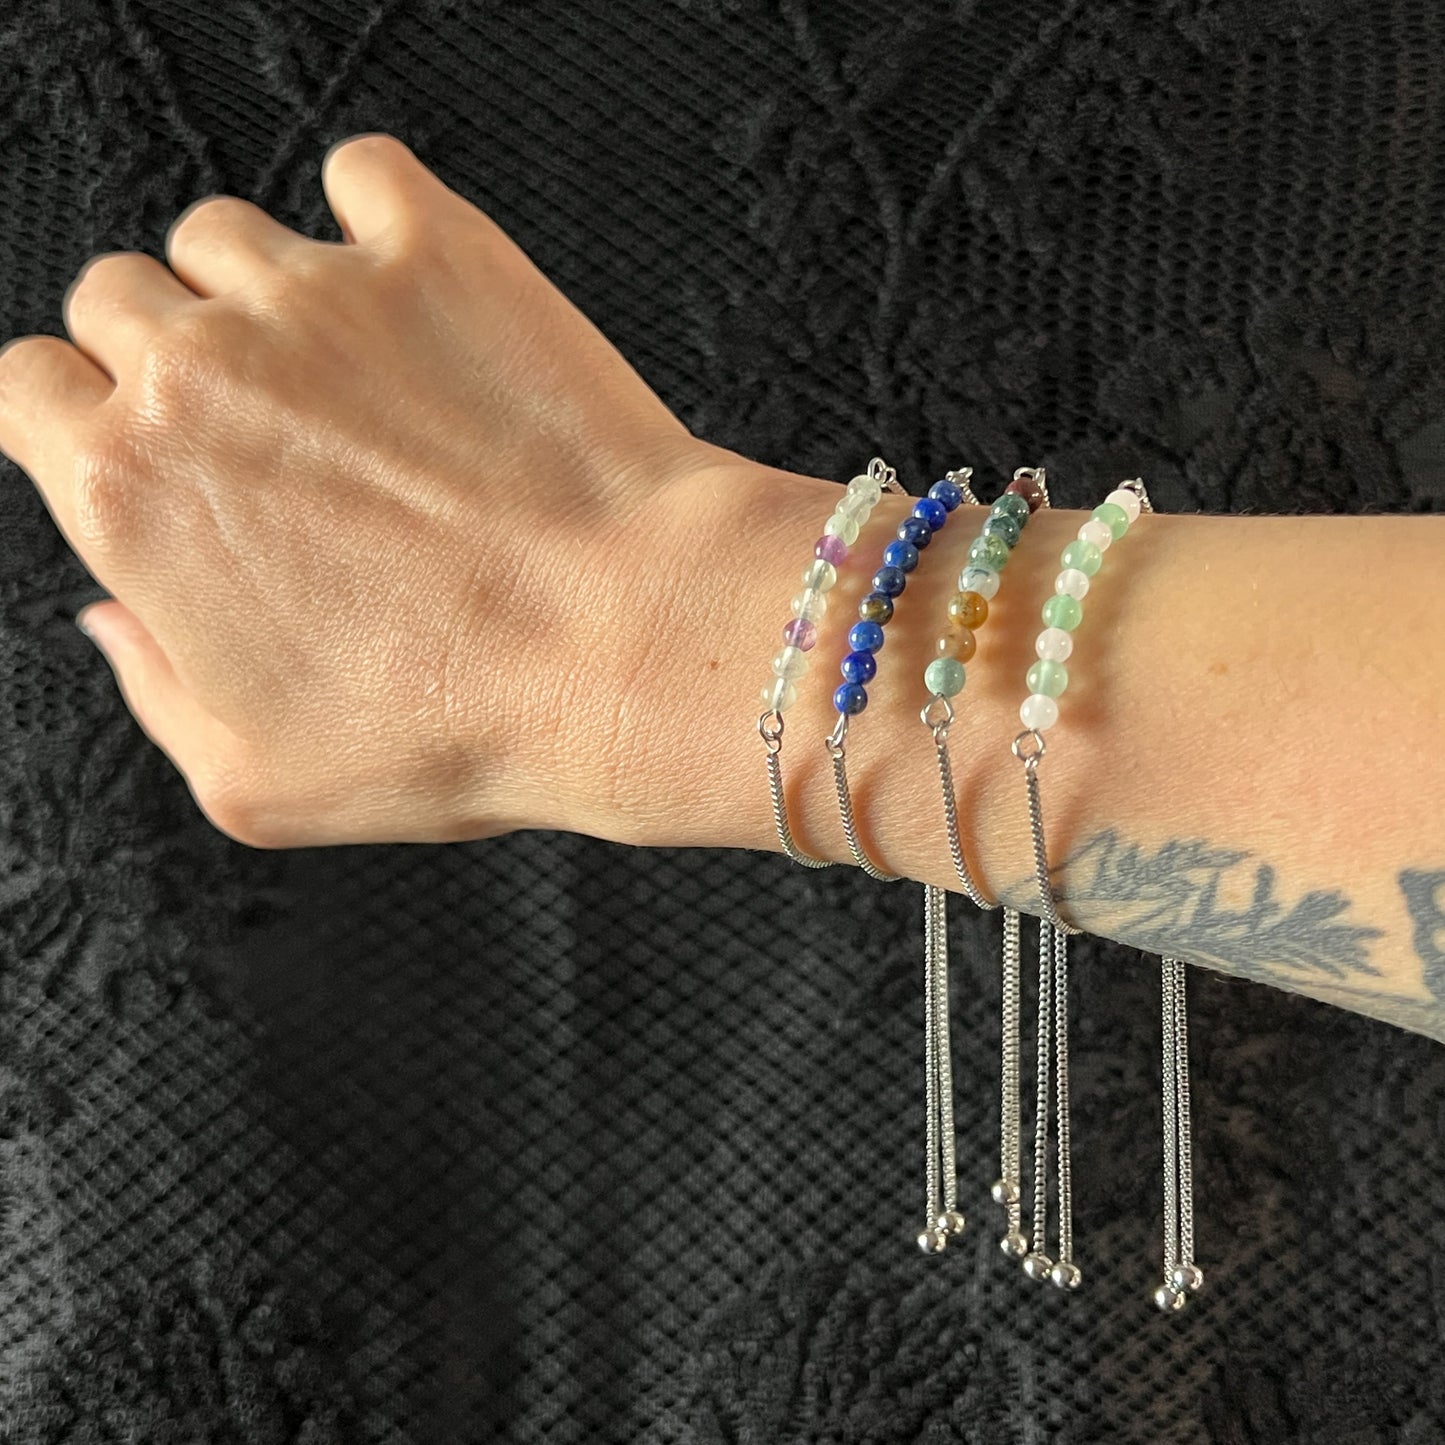 Slider bracelet, made of stainless steel and fluorite, lapis lazuli, indian agate, or aventurine and rose quartz Baguette Magick